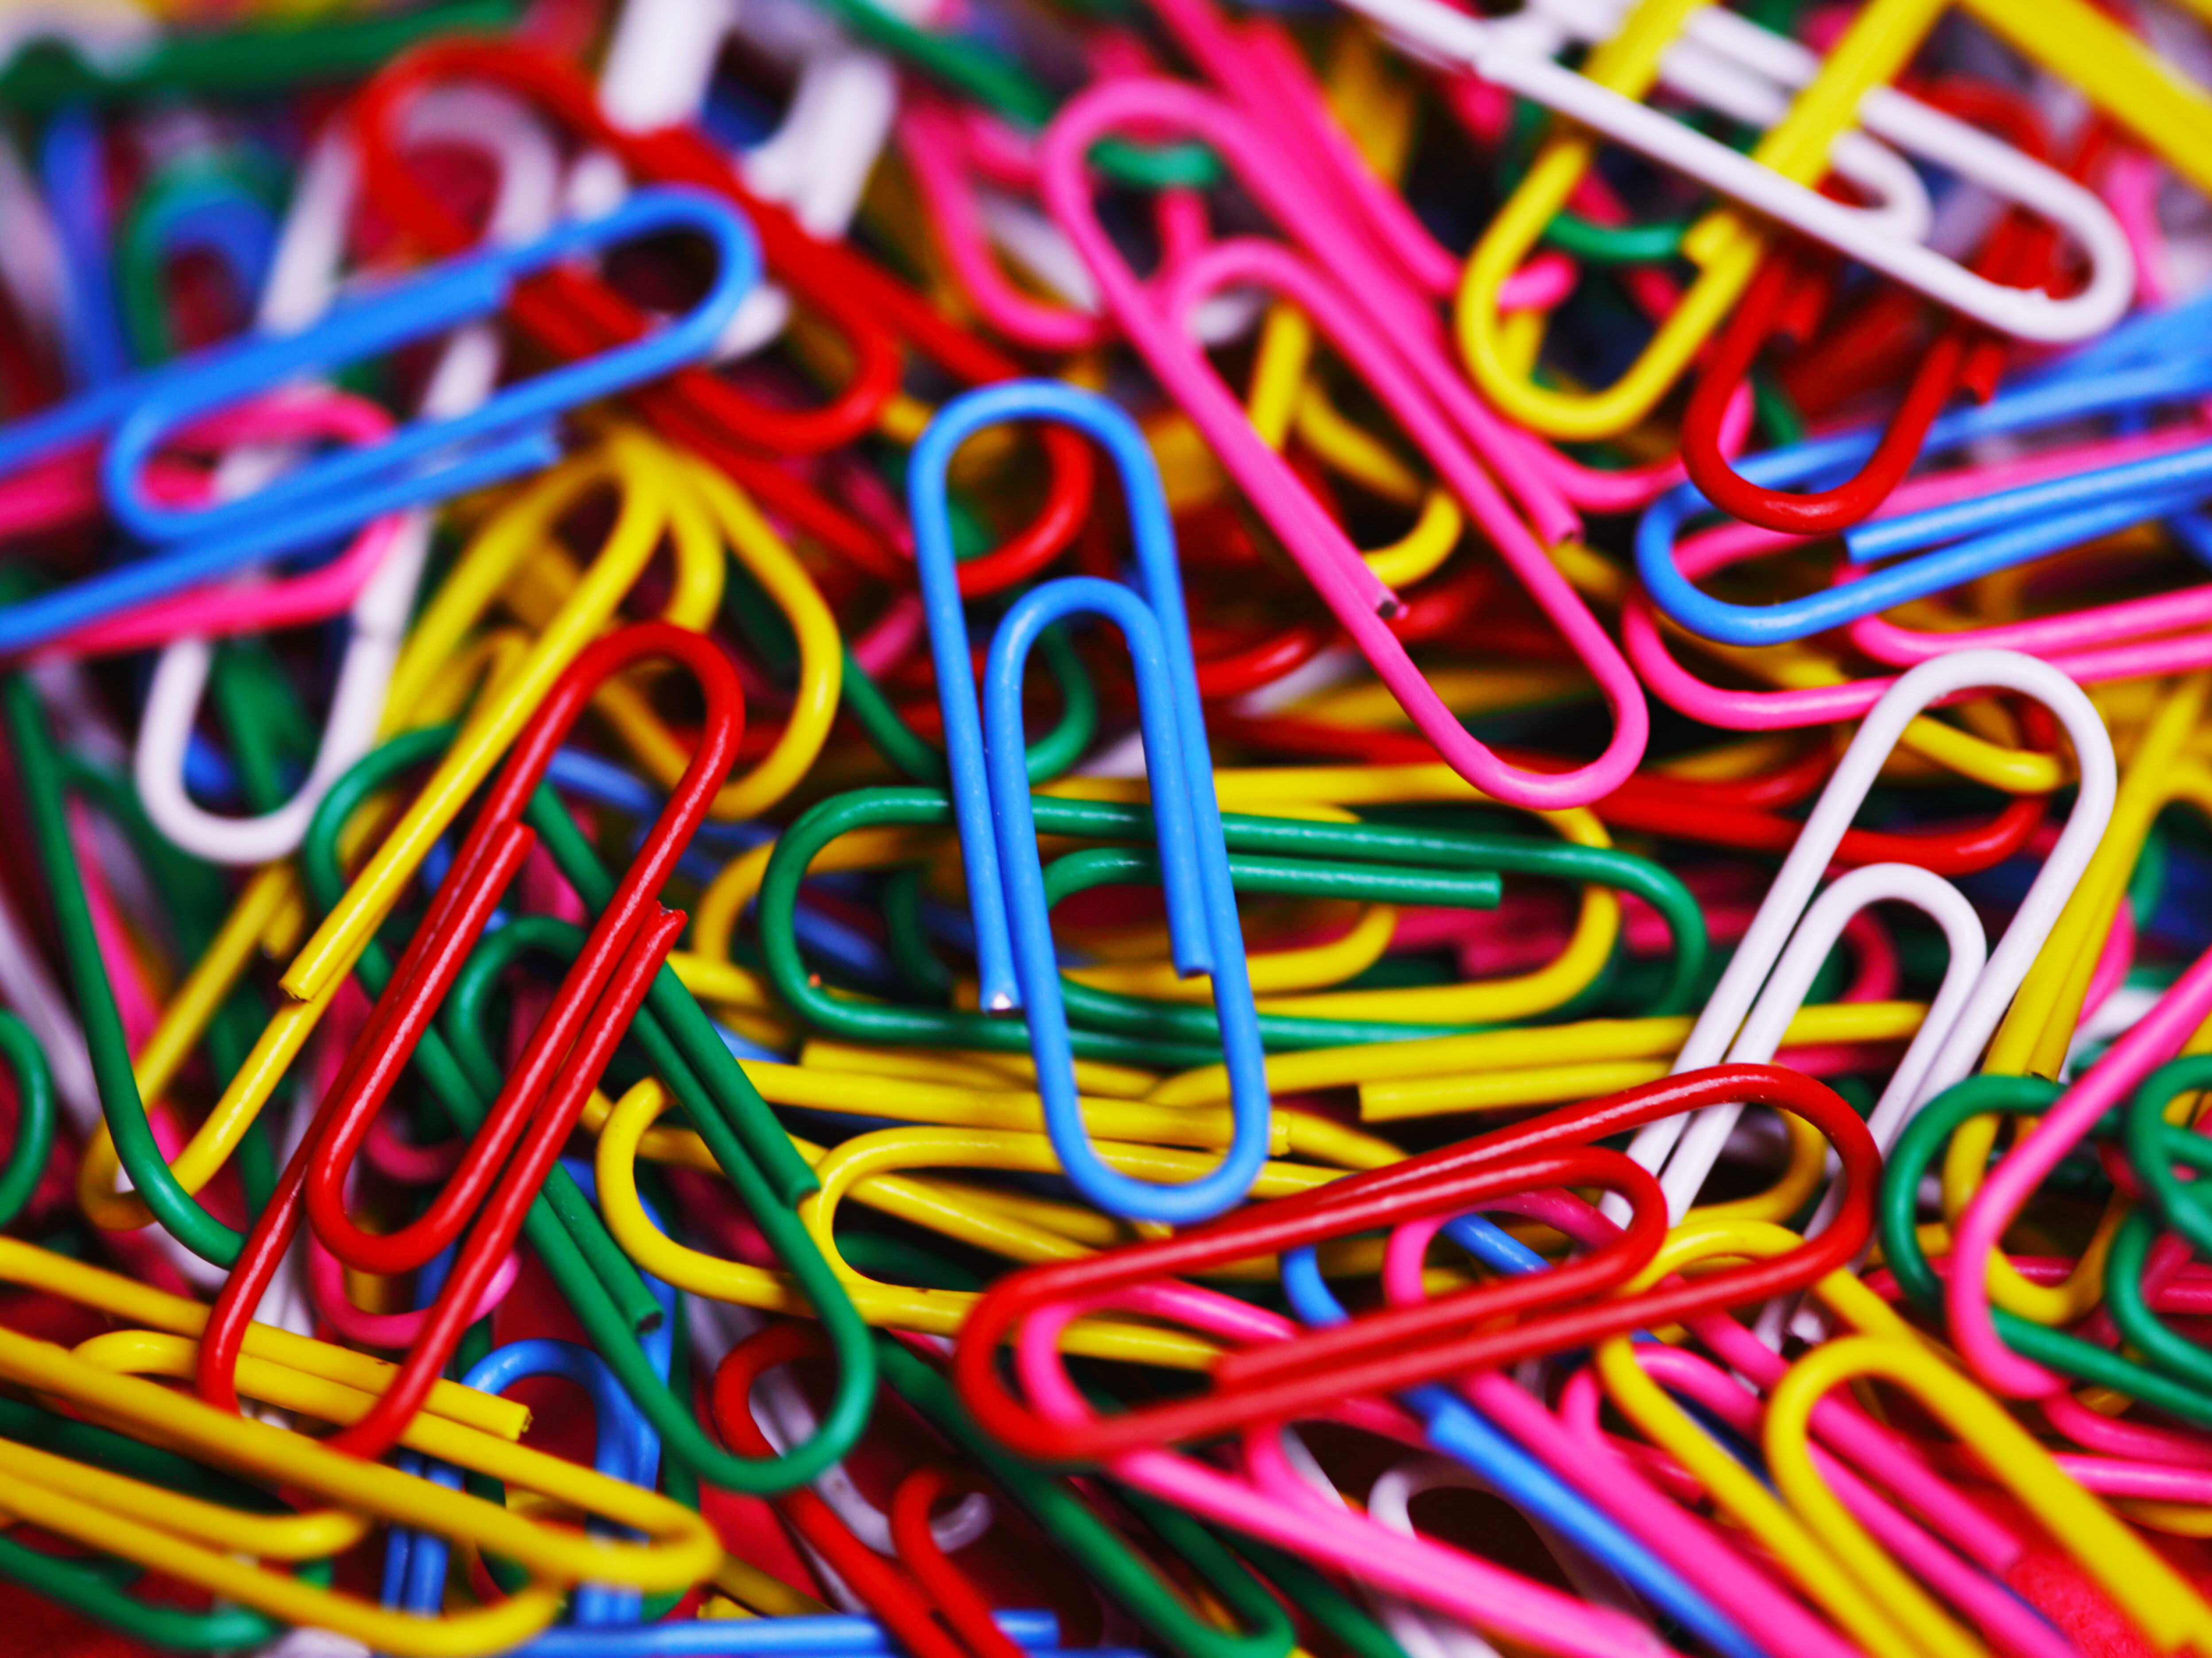 Colourful assortment of paper clips